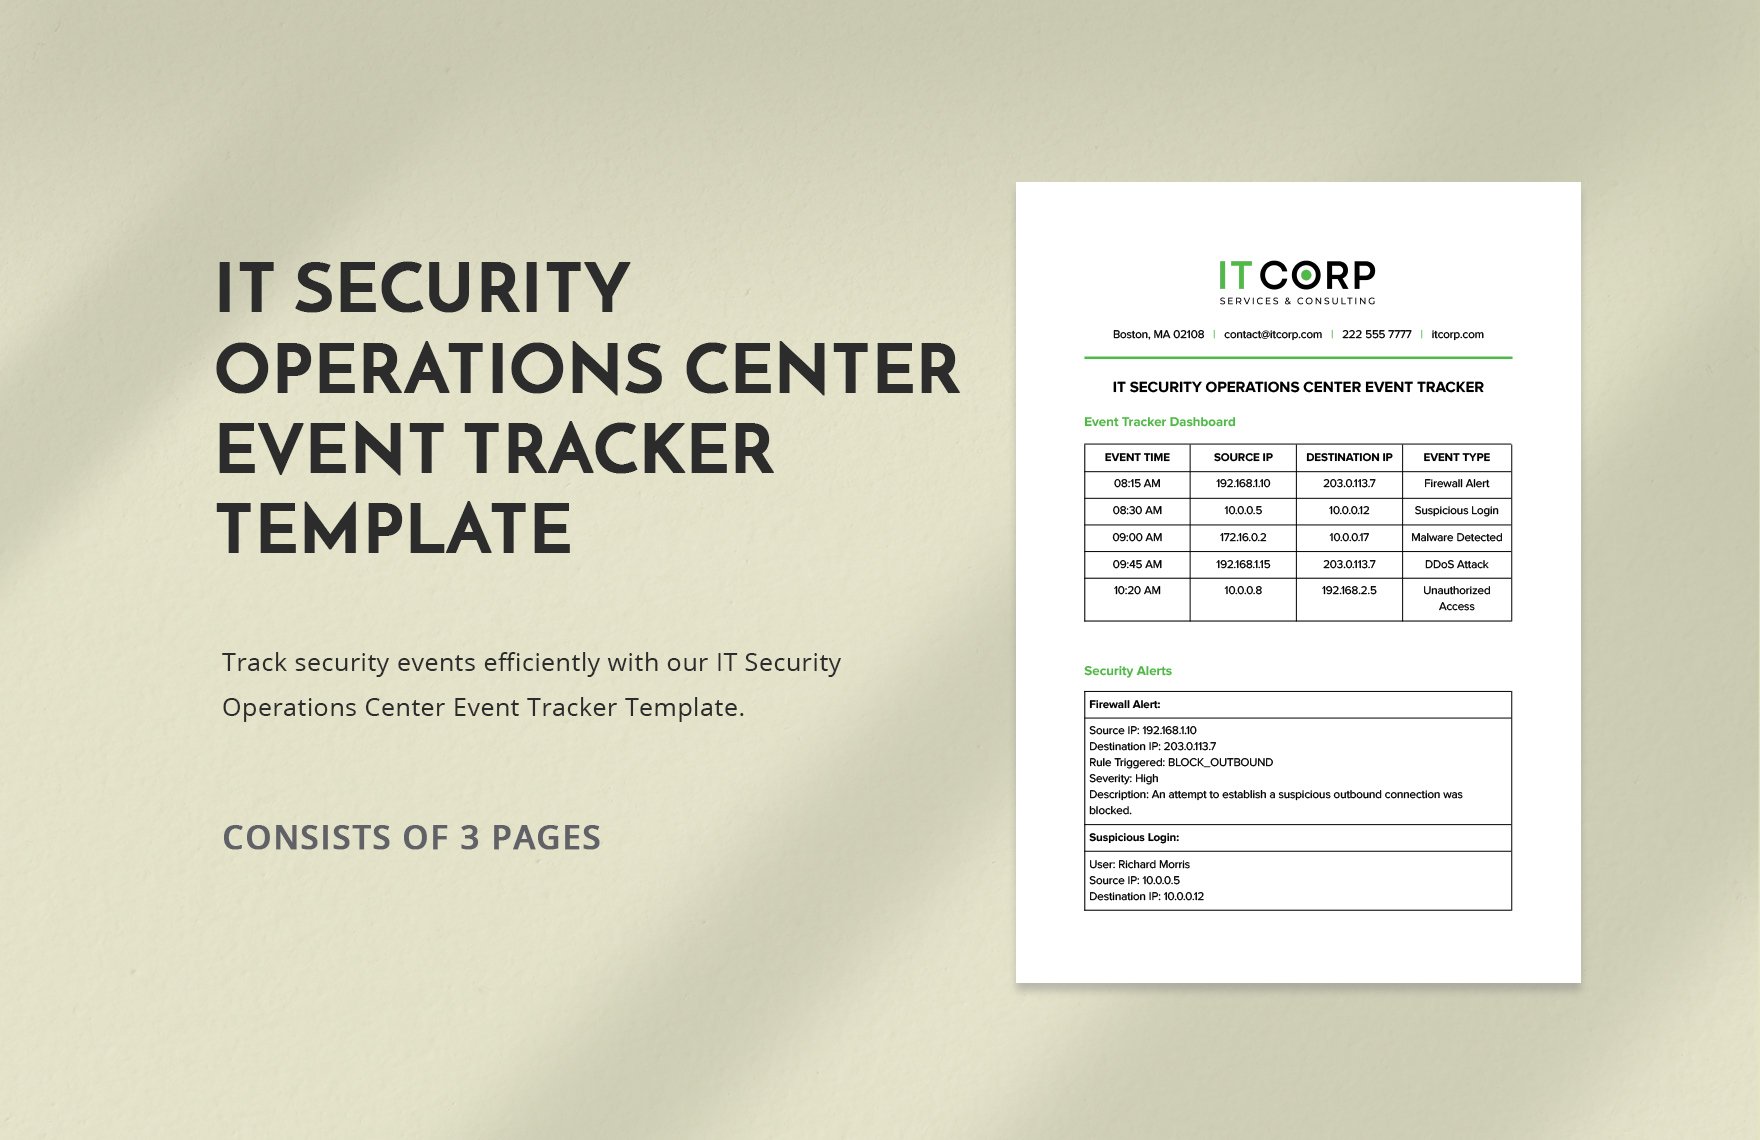 IT Security Operations Center Event Tracker Template 